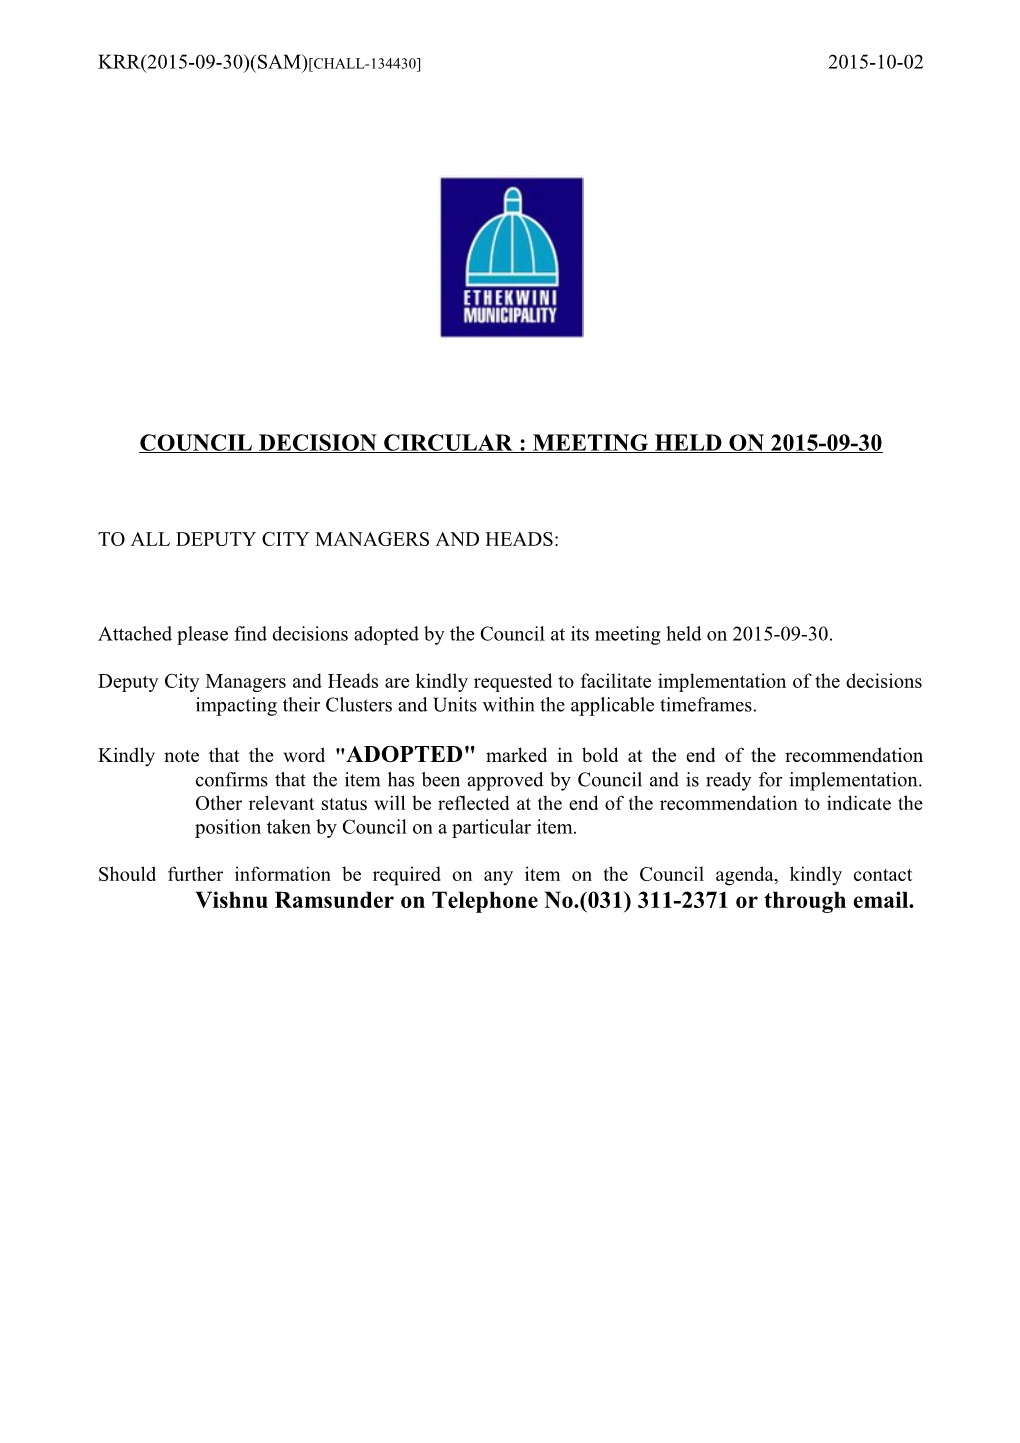 Council Decision Circular : Meeting Held on 2015-09-30